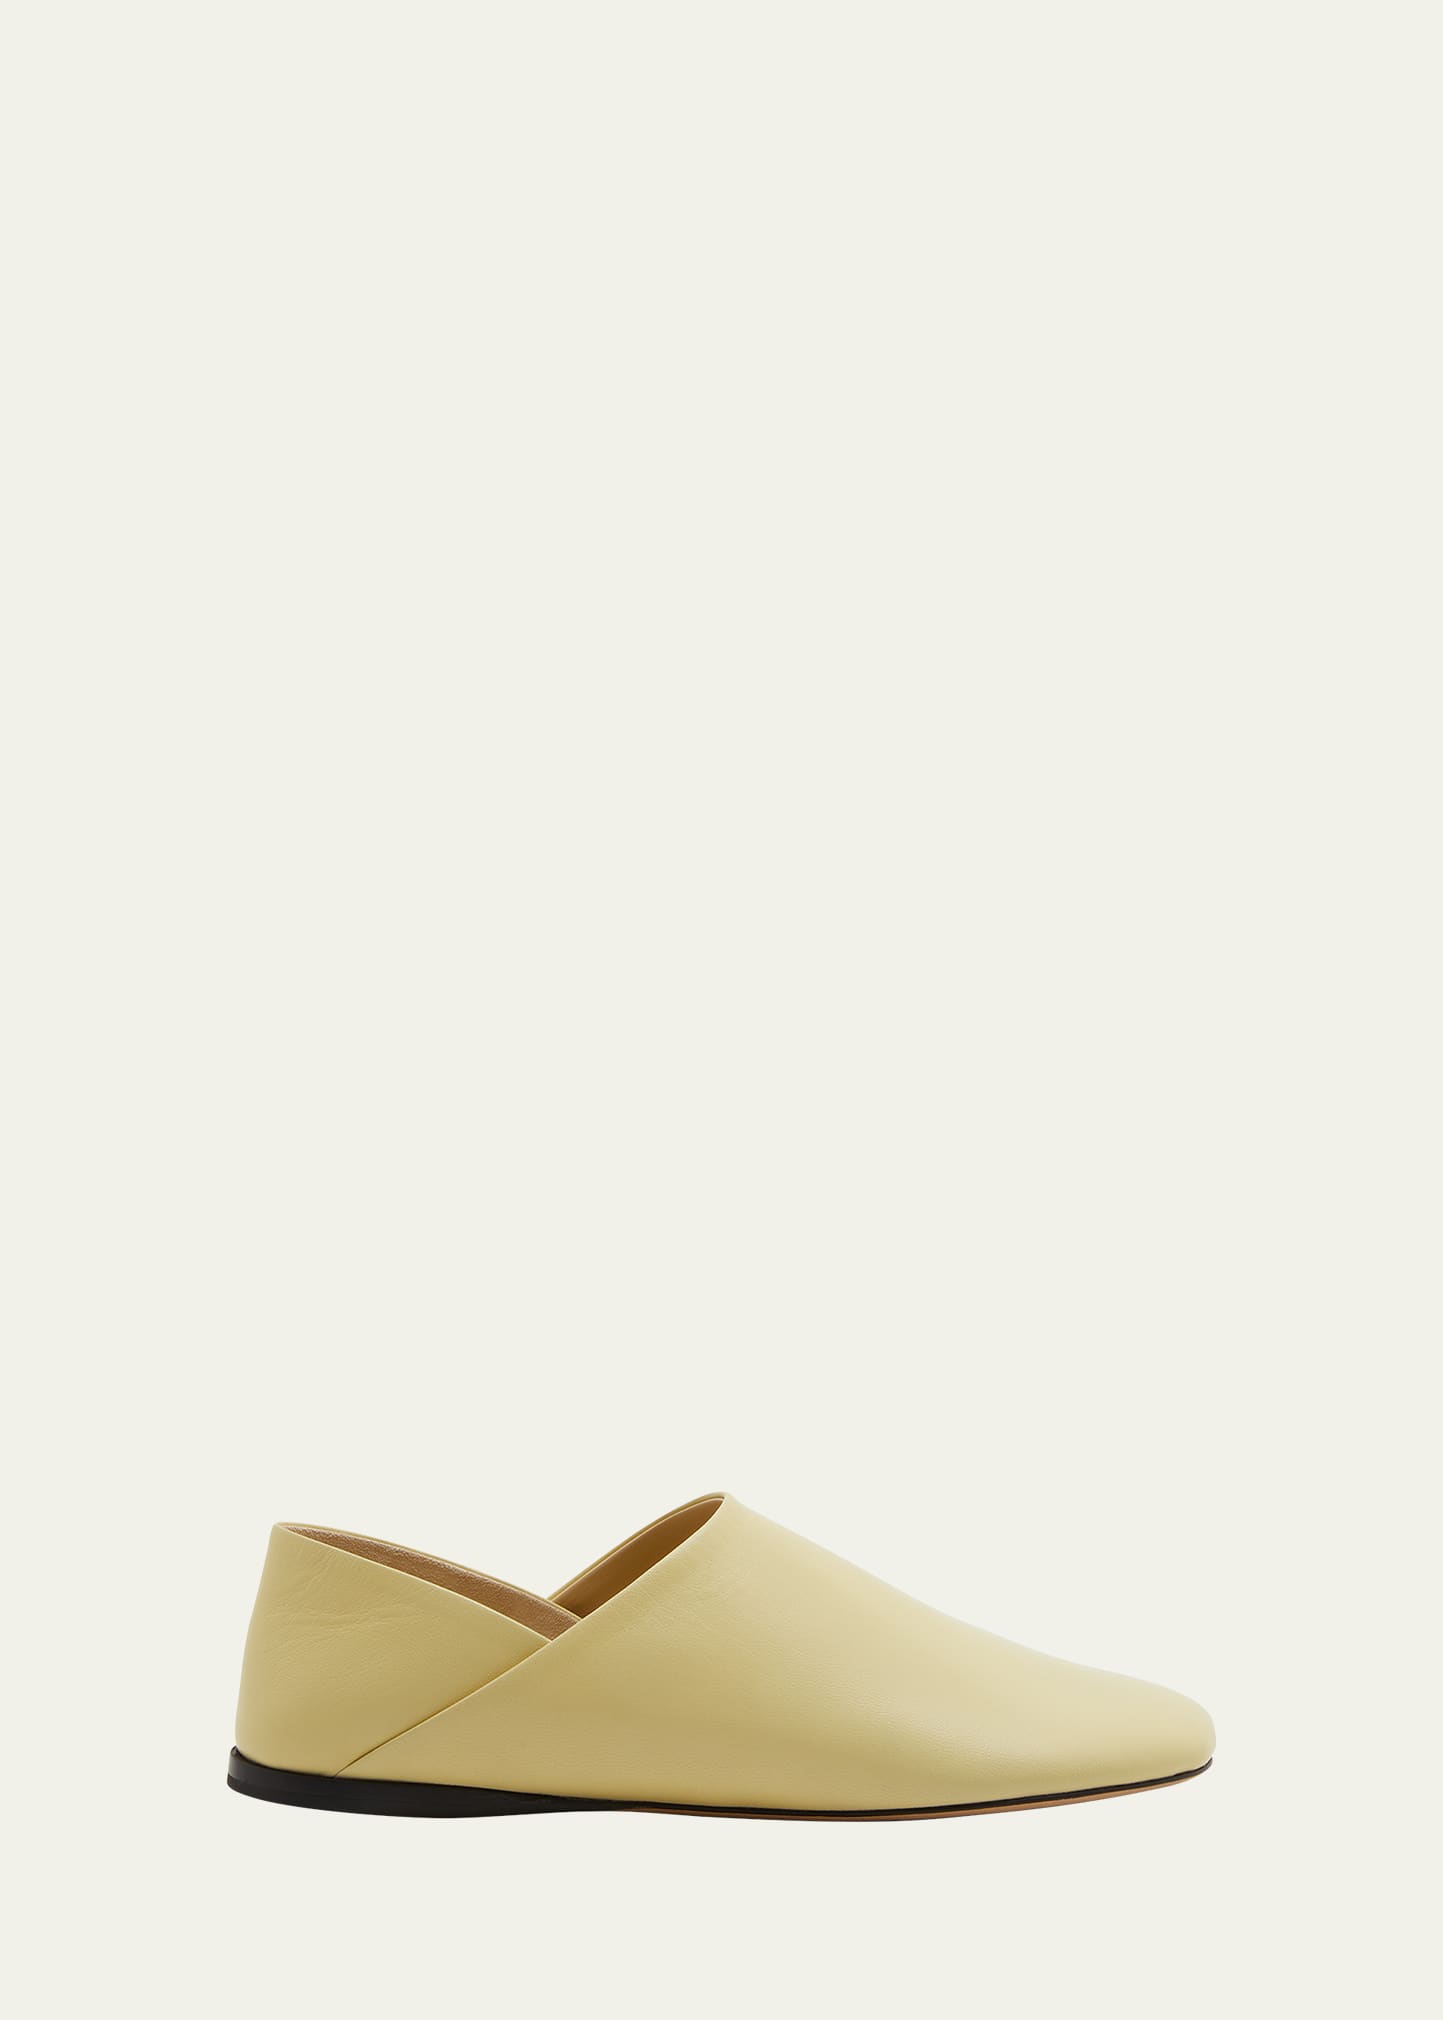 LOEWE TOY LEATHER SLIPPER LOAFERS